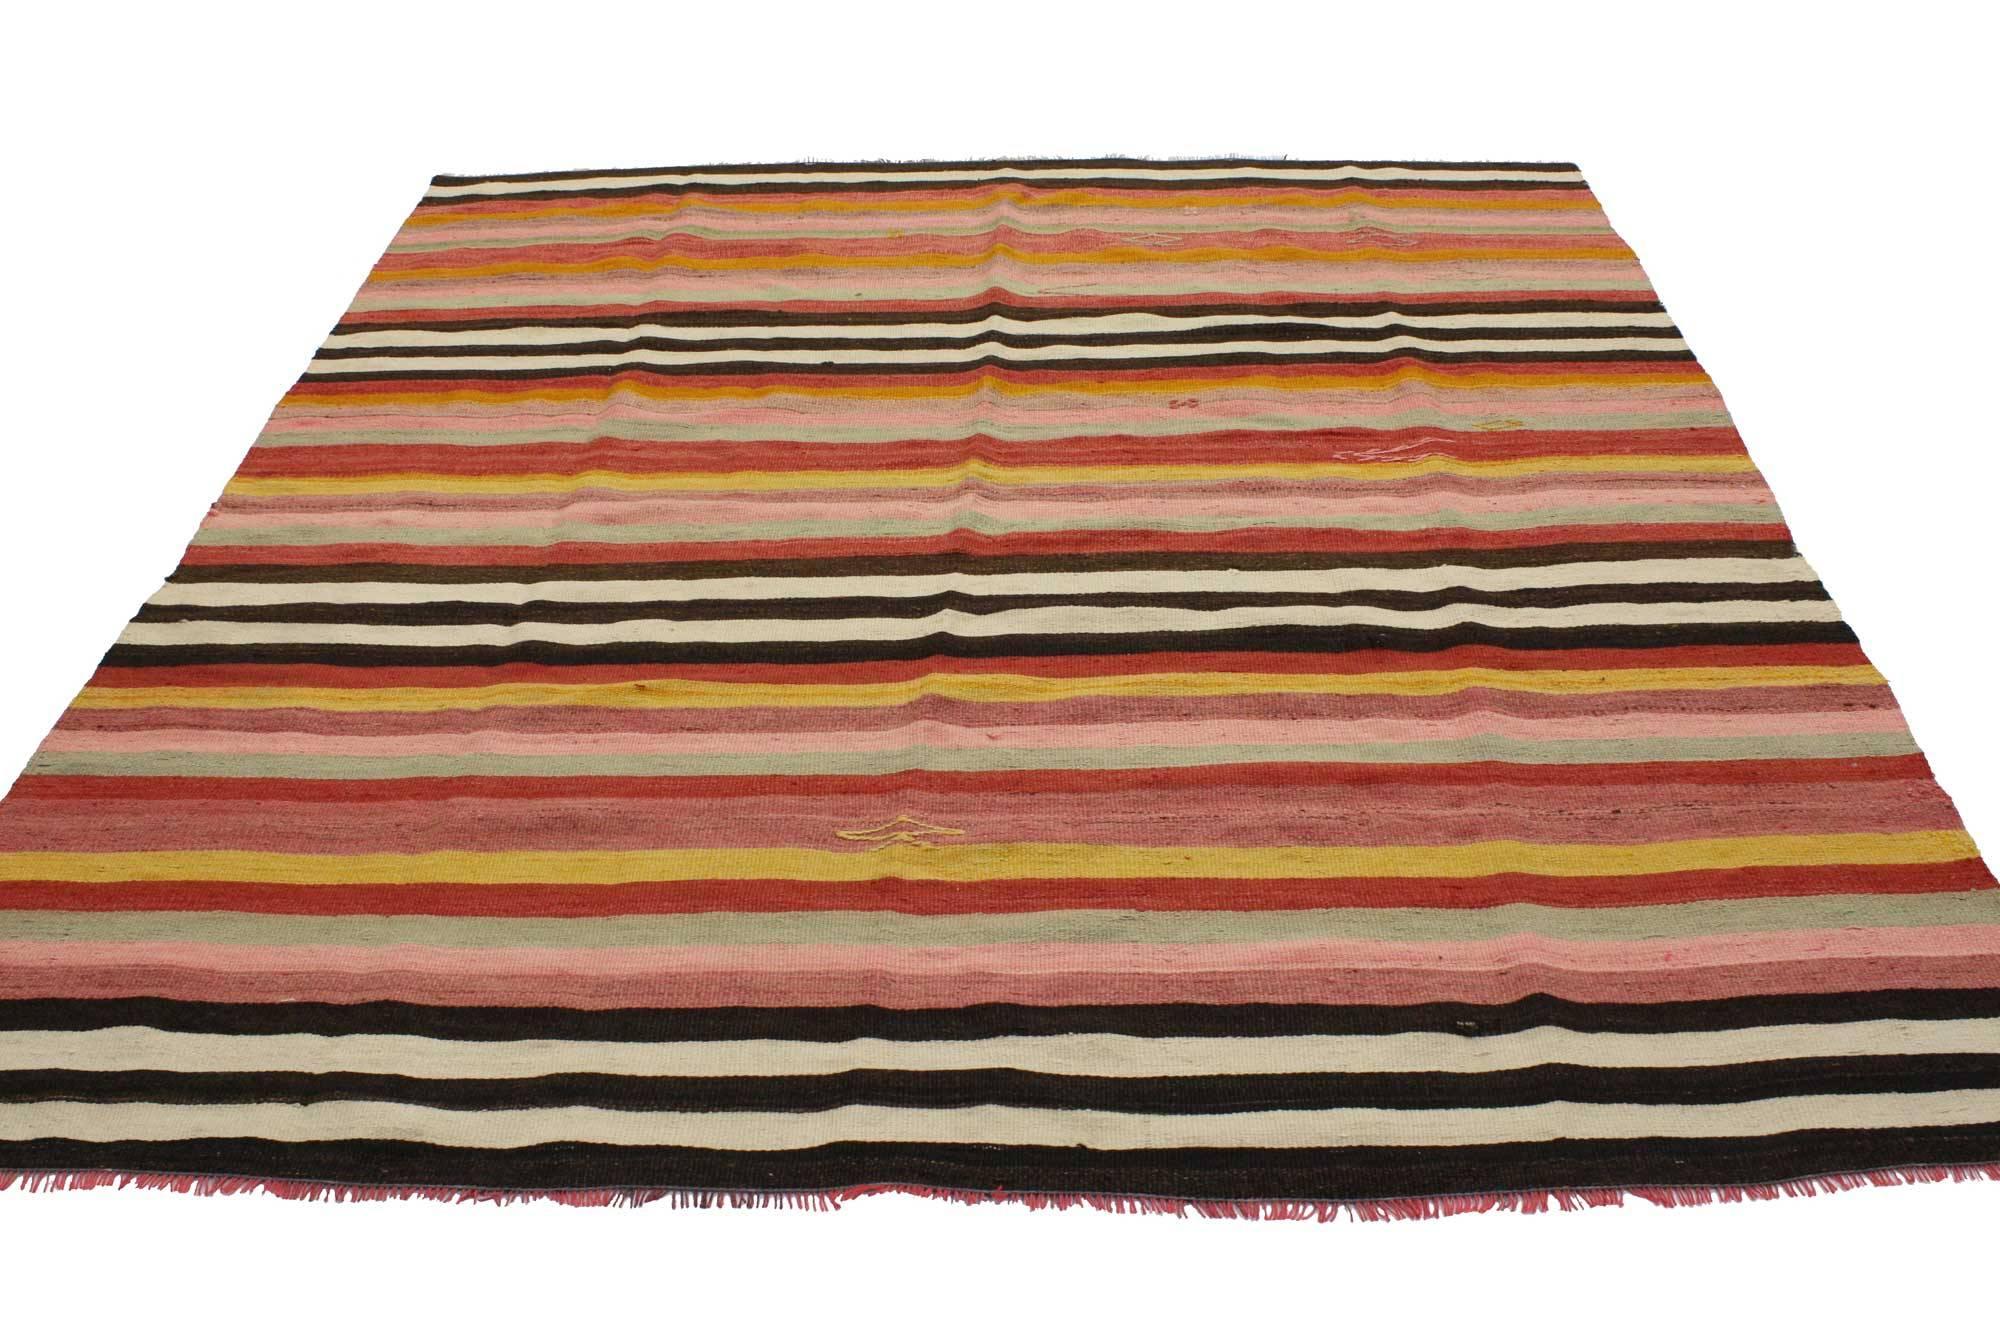 Hand-Woven Vintage Turkish Kilim Rug with Stripes and Boho Chic Style, Striped Flat-Weave